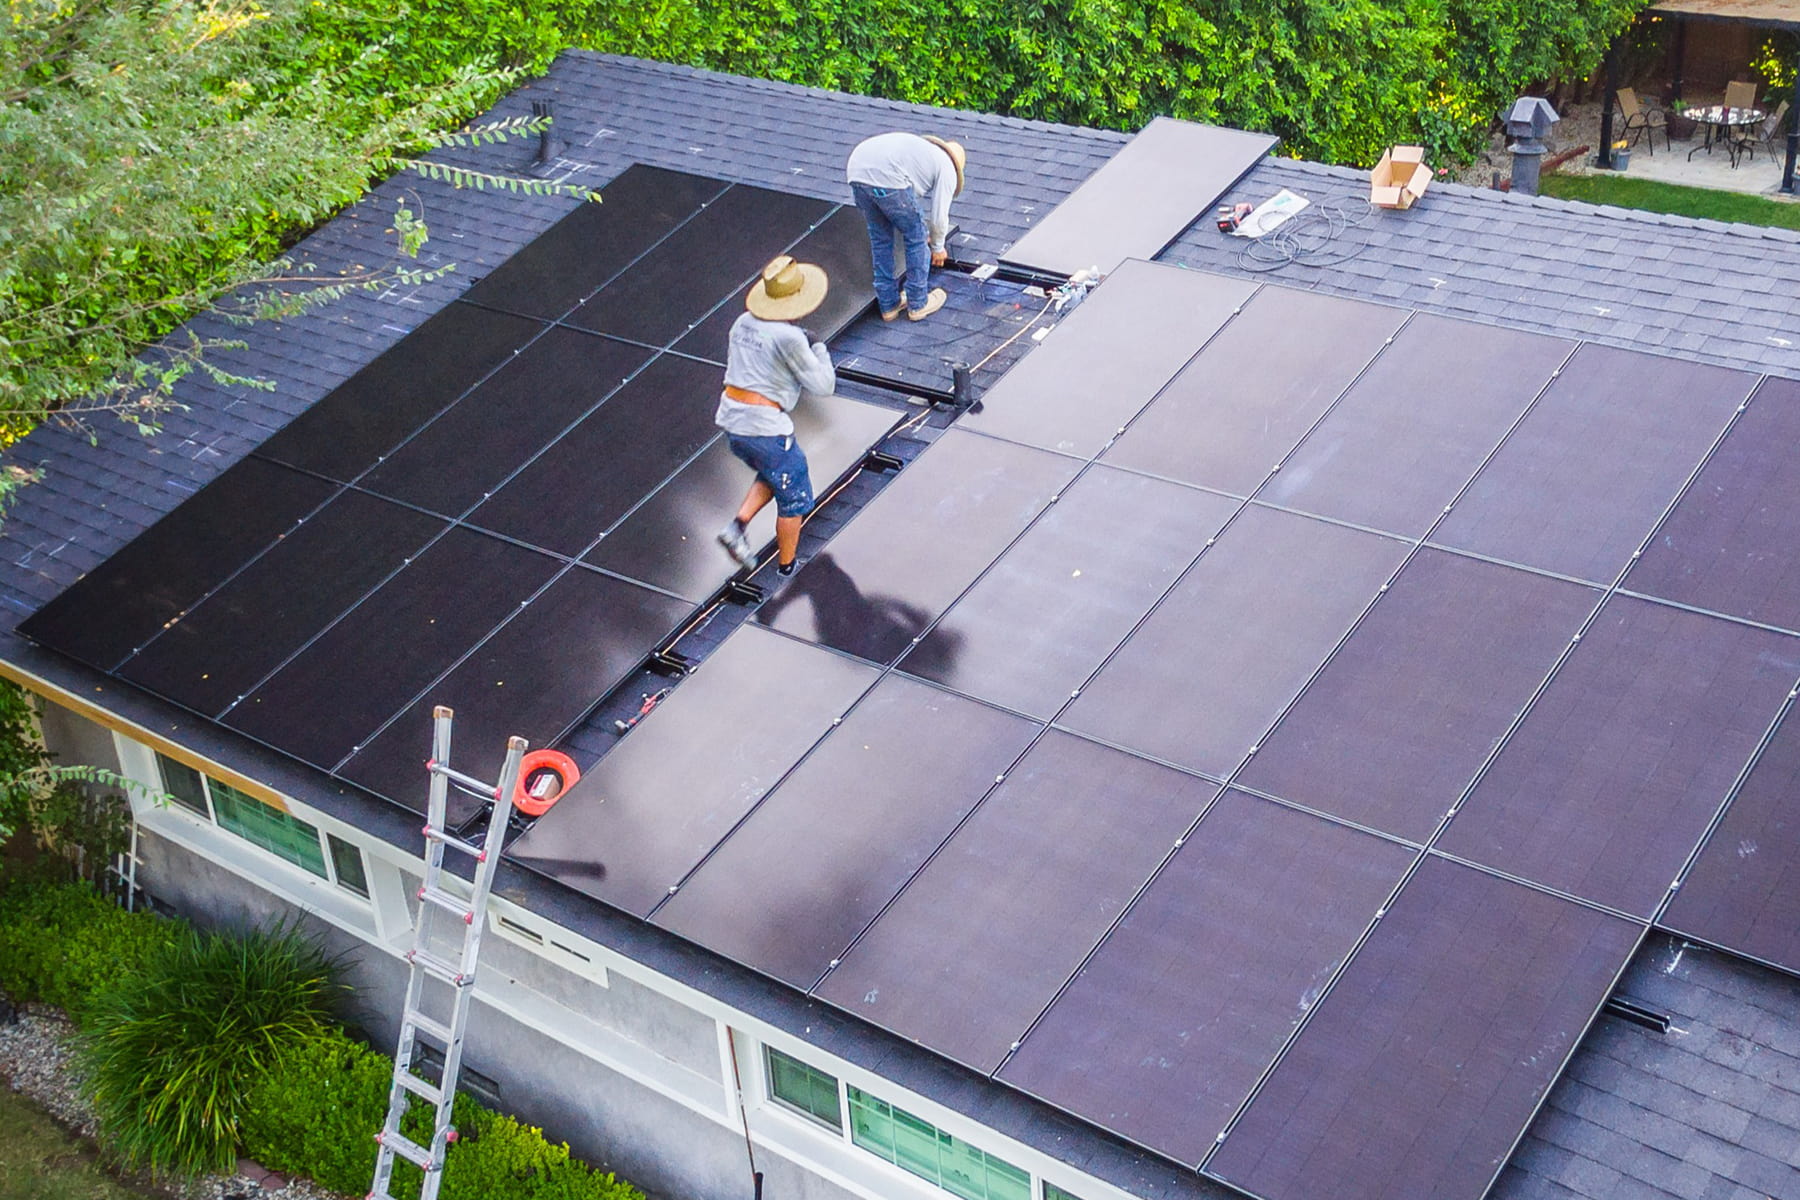 Revalue.io workers installing solar panels on a roof